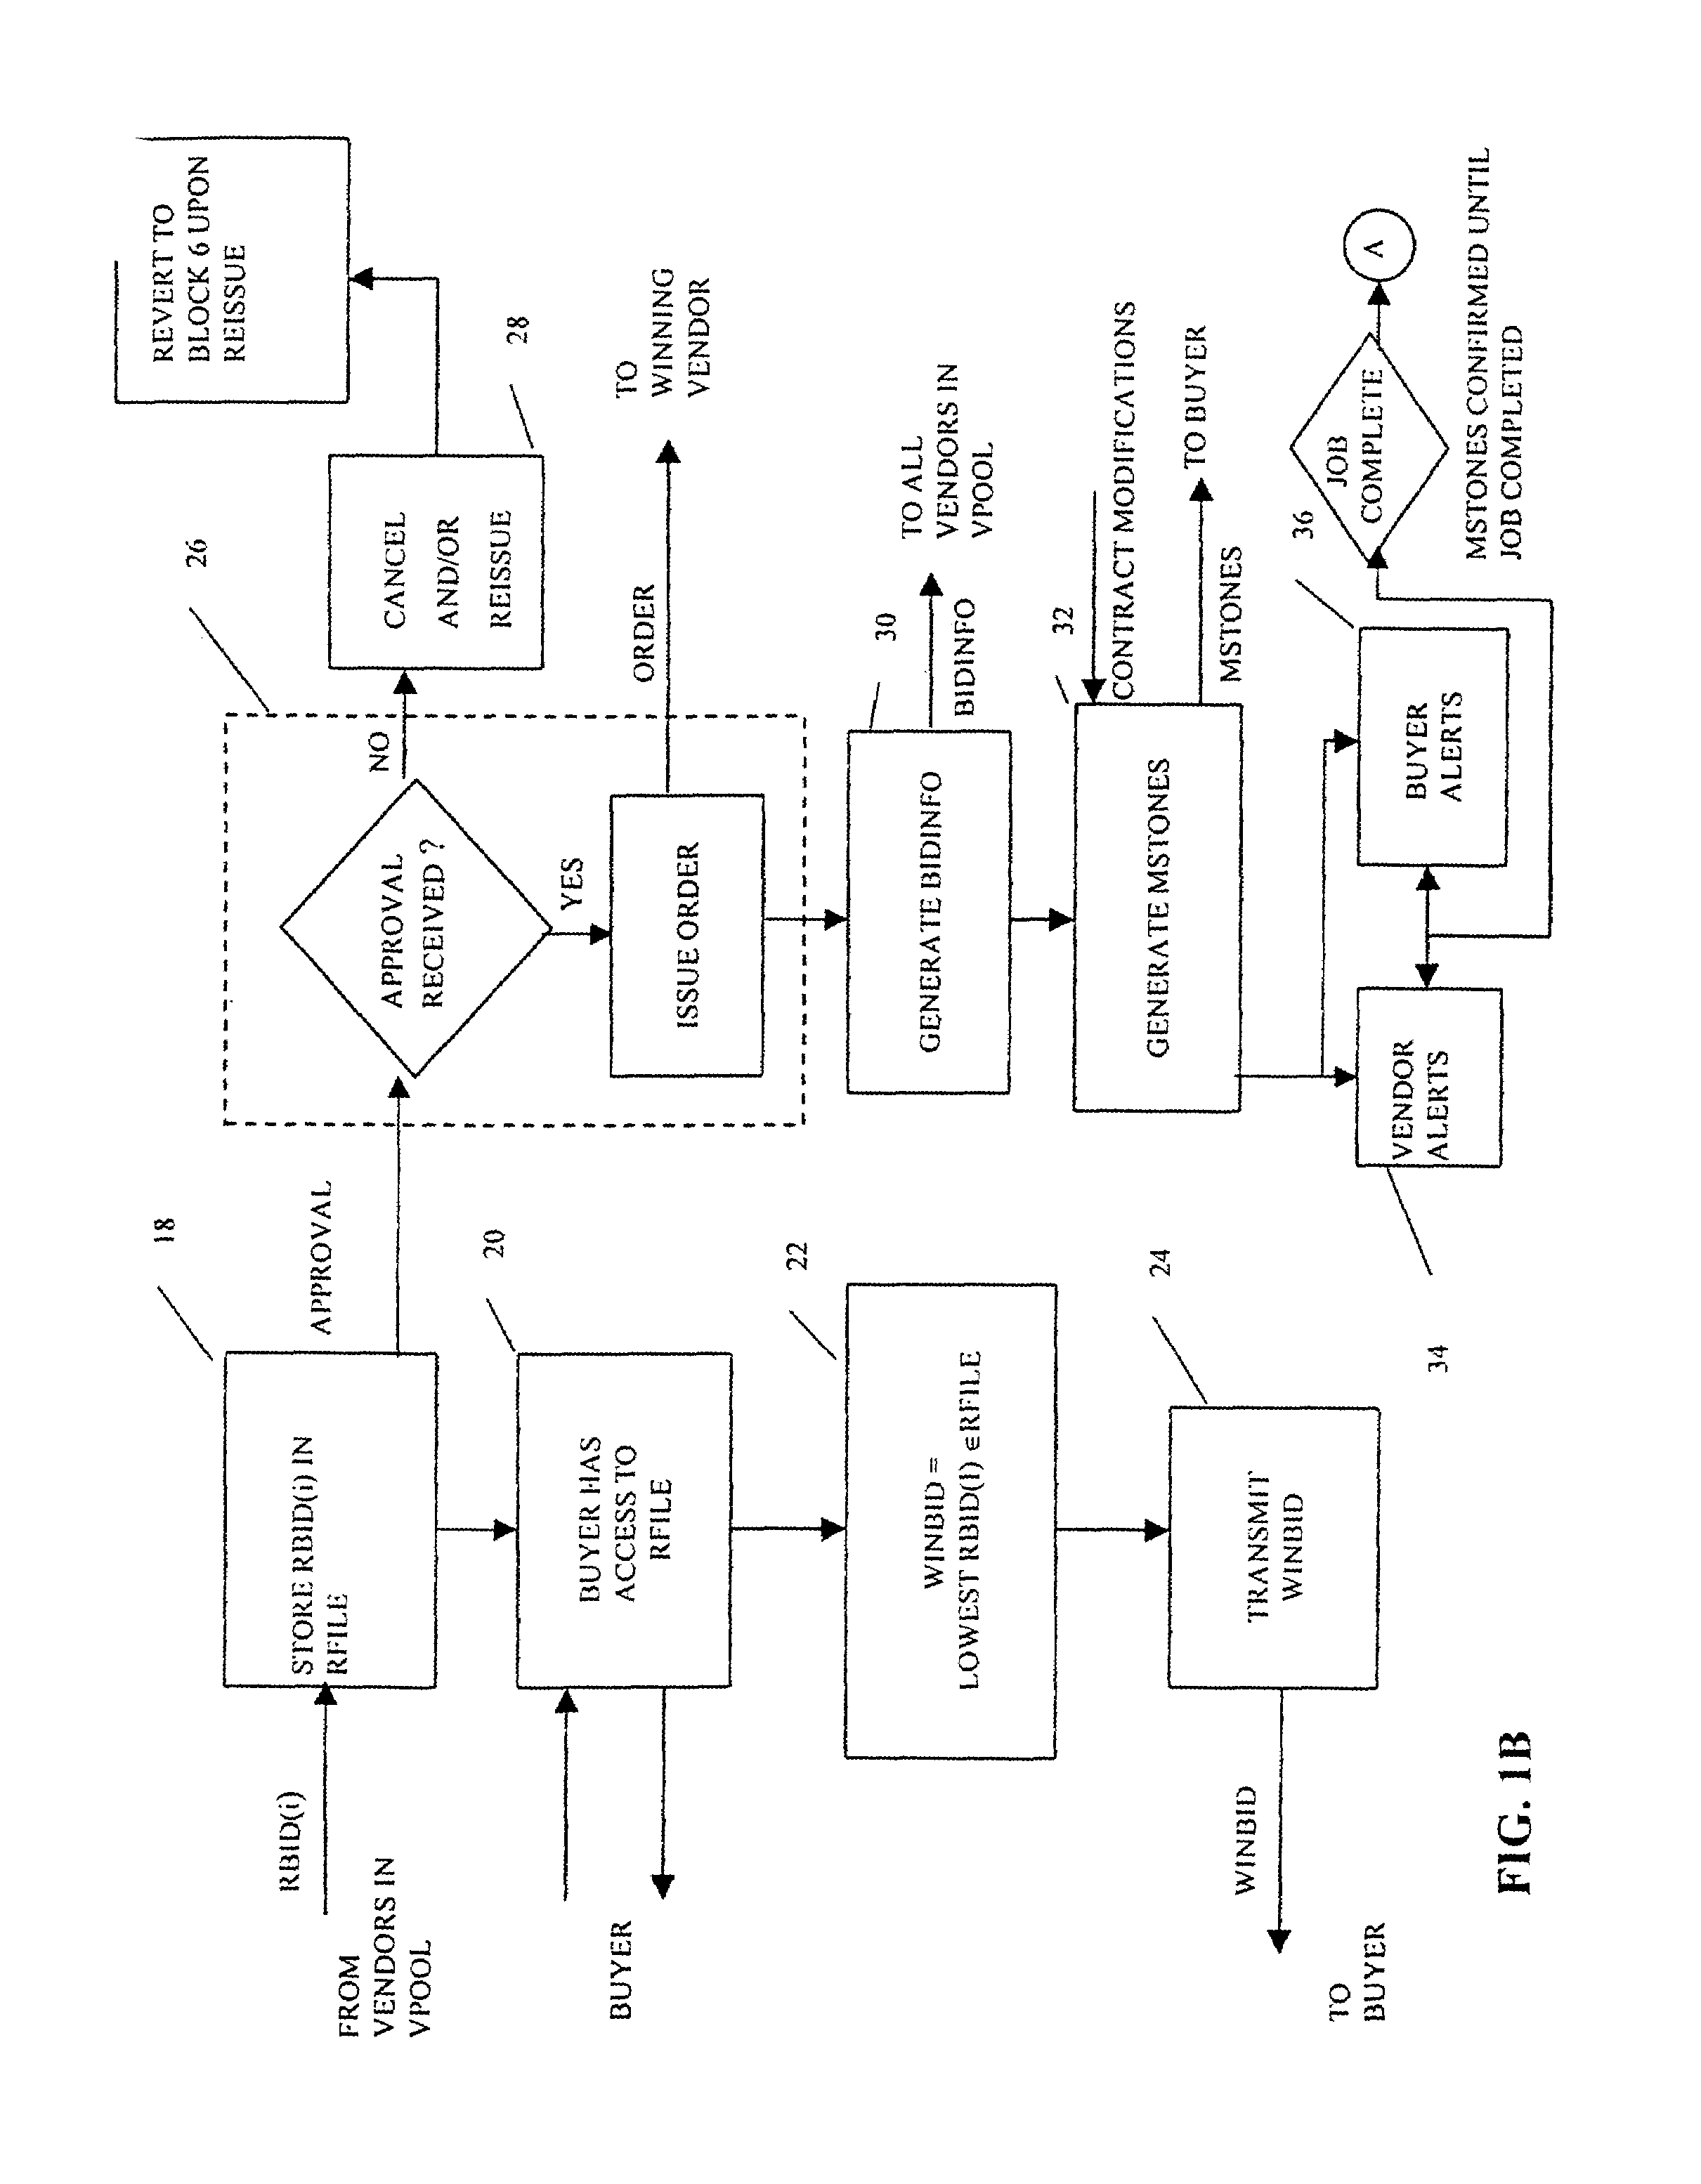 System and method for competitive pricing and procurement of customized goods and services